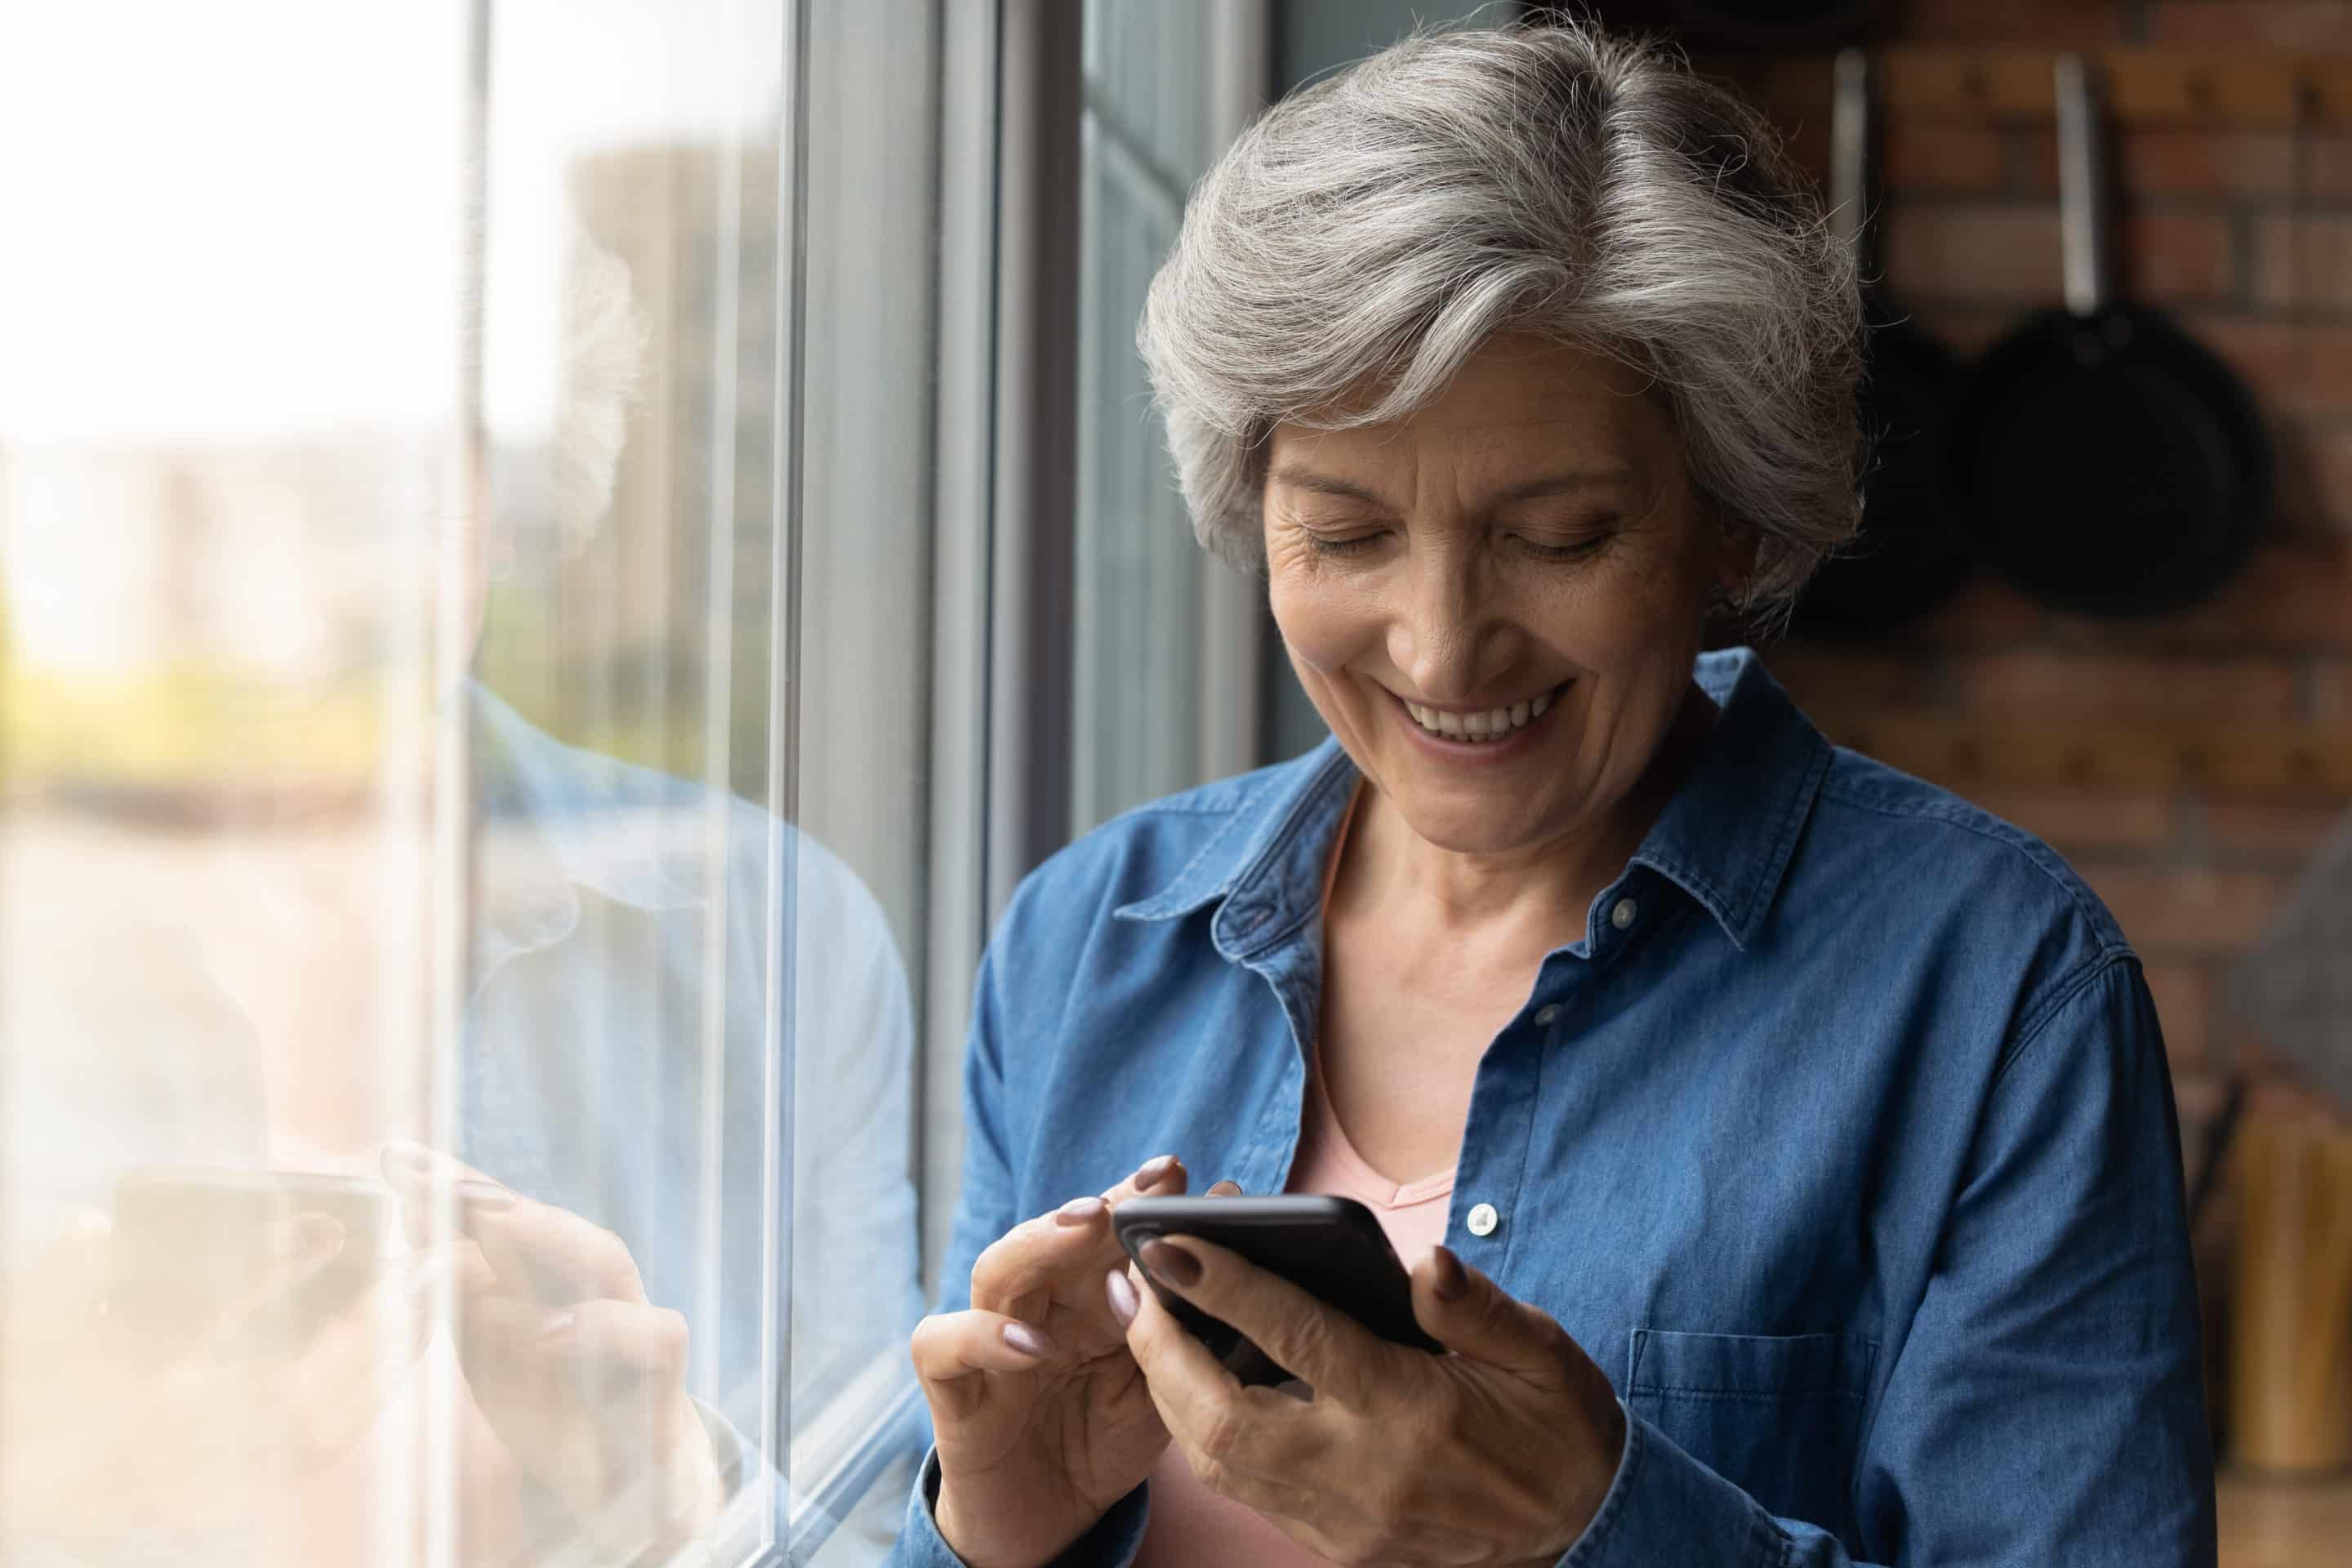 An older lady in a blue shirt smiling down at her phone by the window